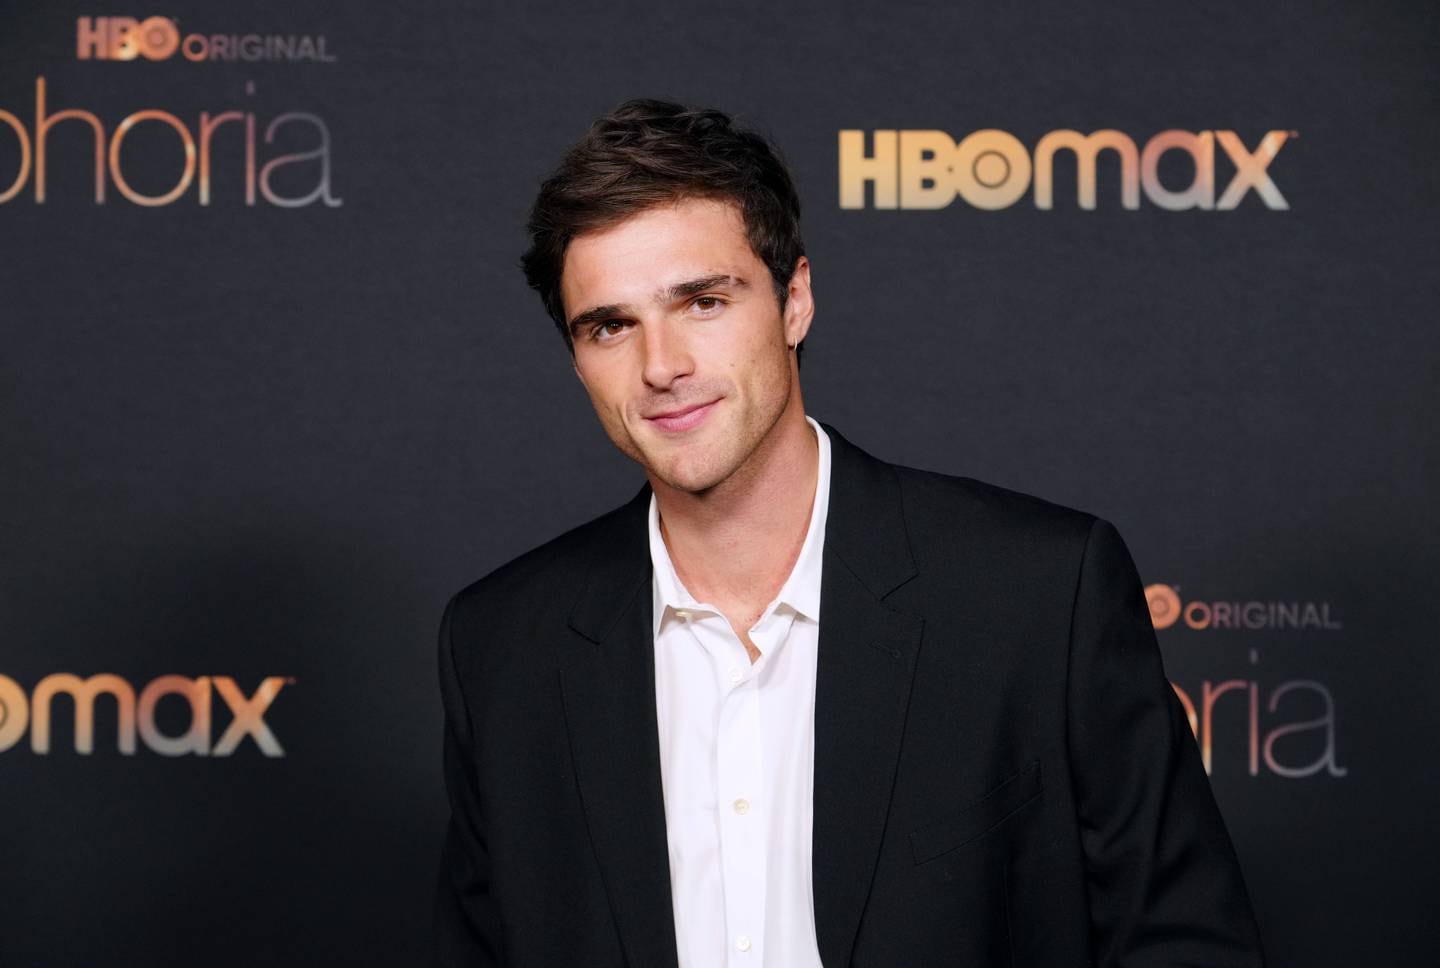 Netflix's foray into romcoms has created a new generation of stars, including 'The Kissing Booth's' Jacob Elordi. Getty Images